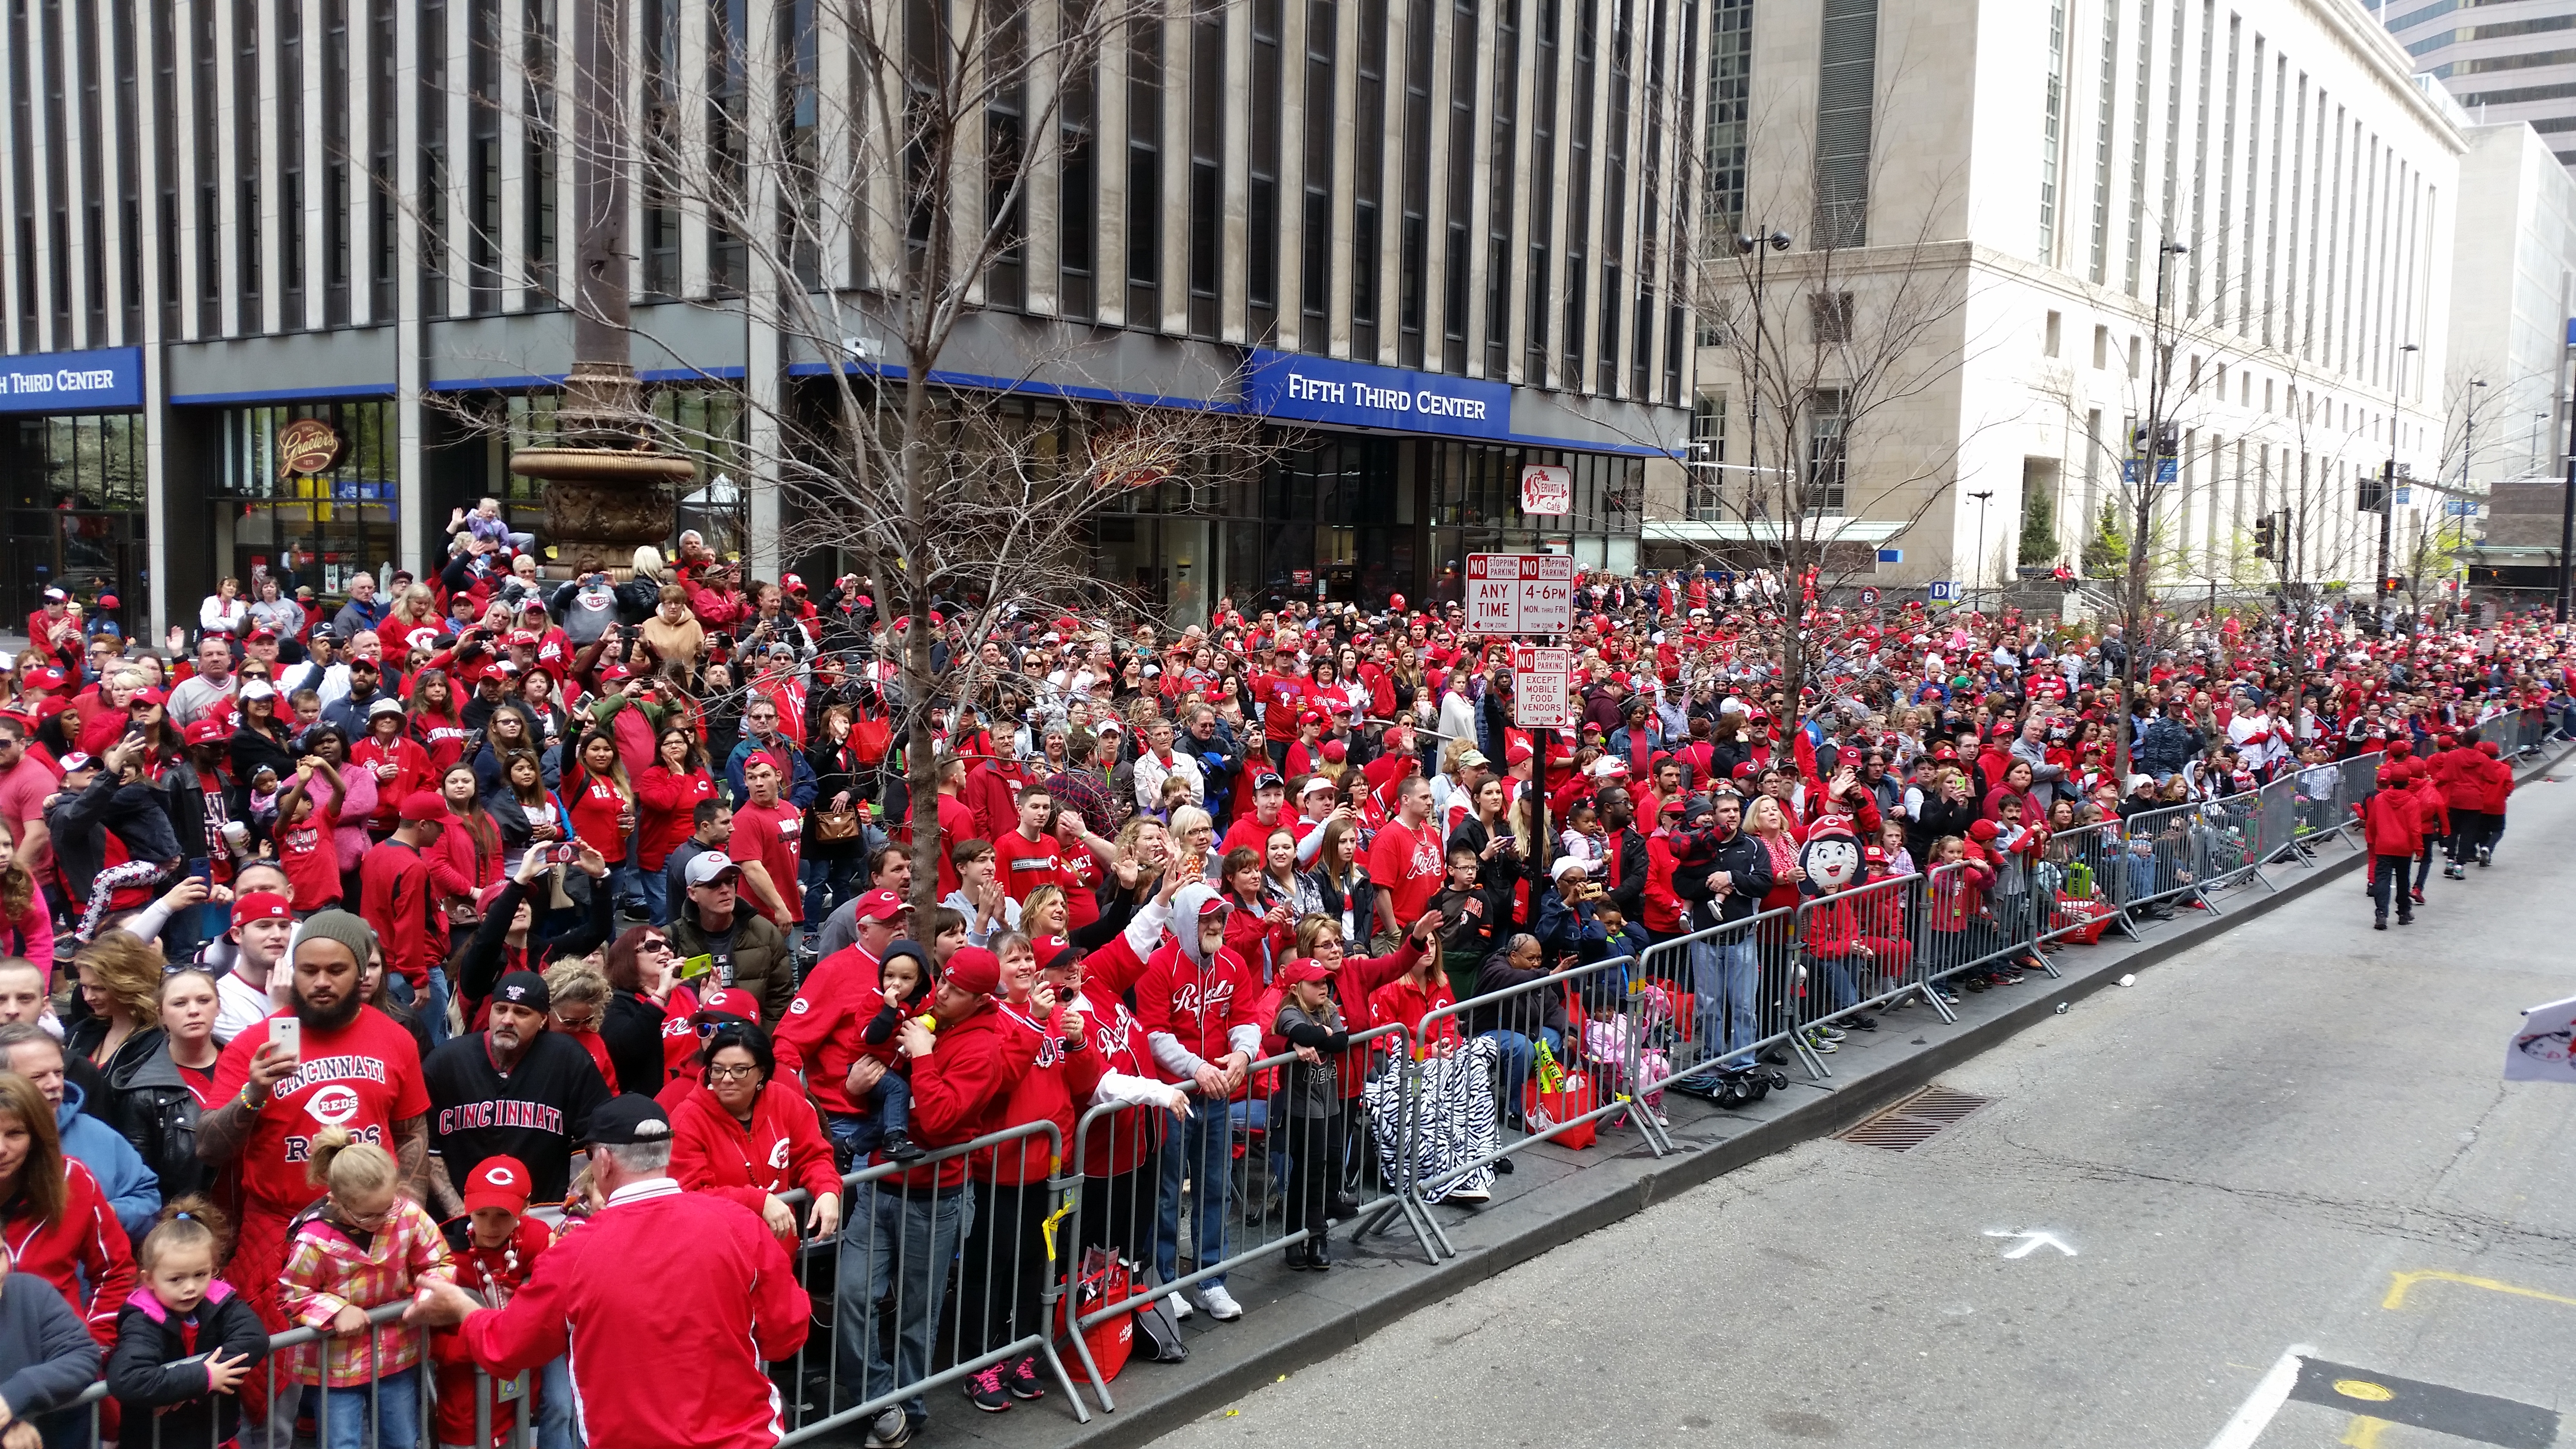 Fans line the streets to watch the Cincinnati Reds Opening Day Parade